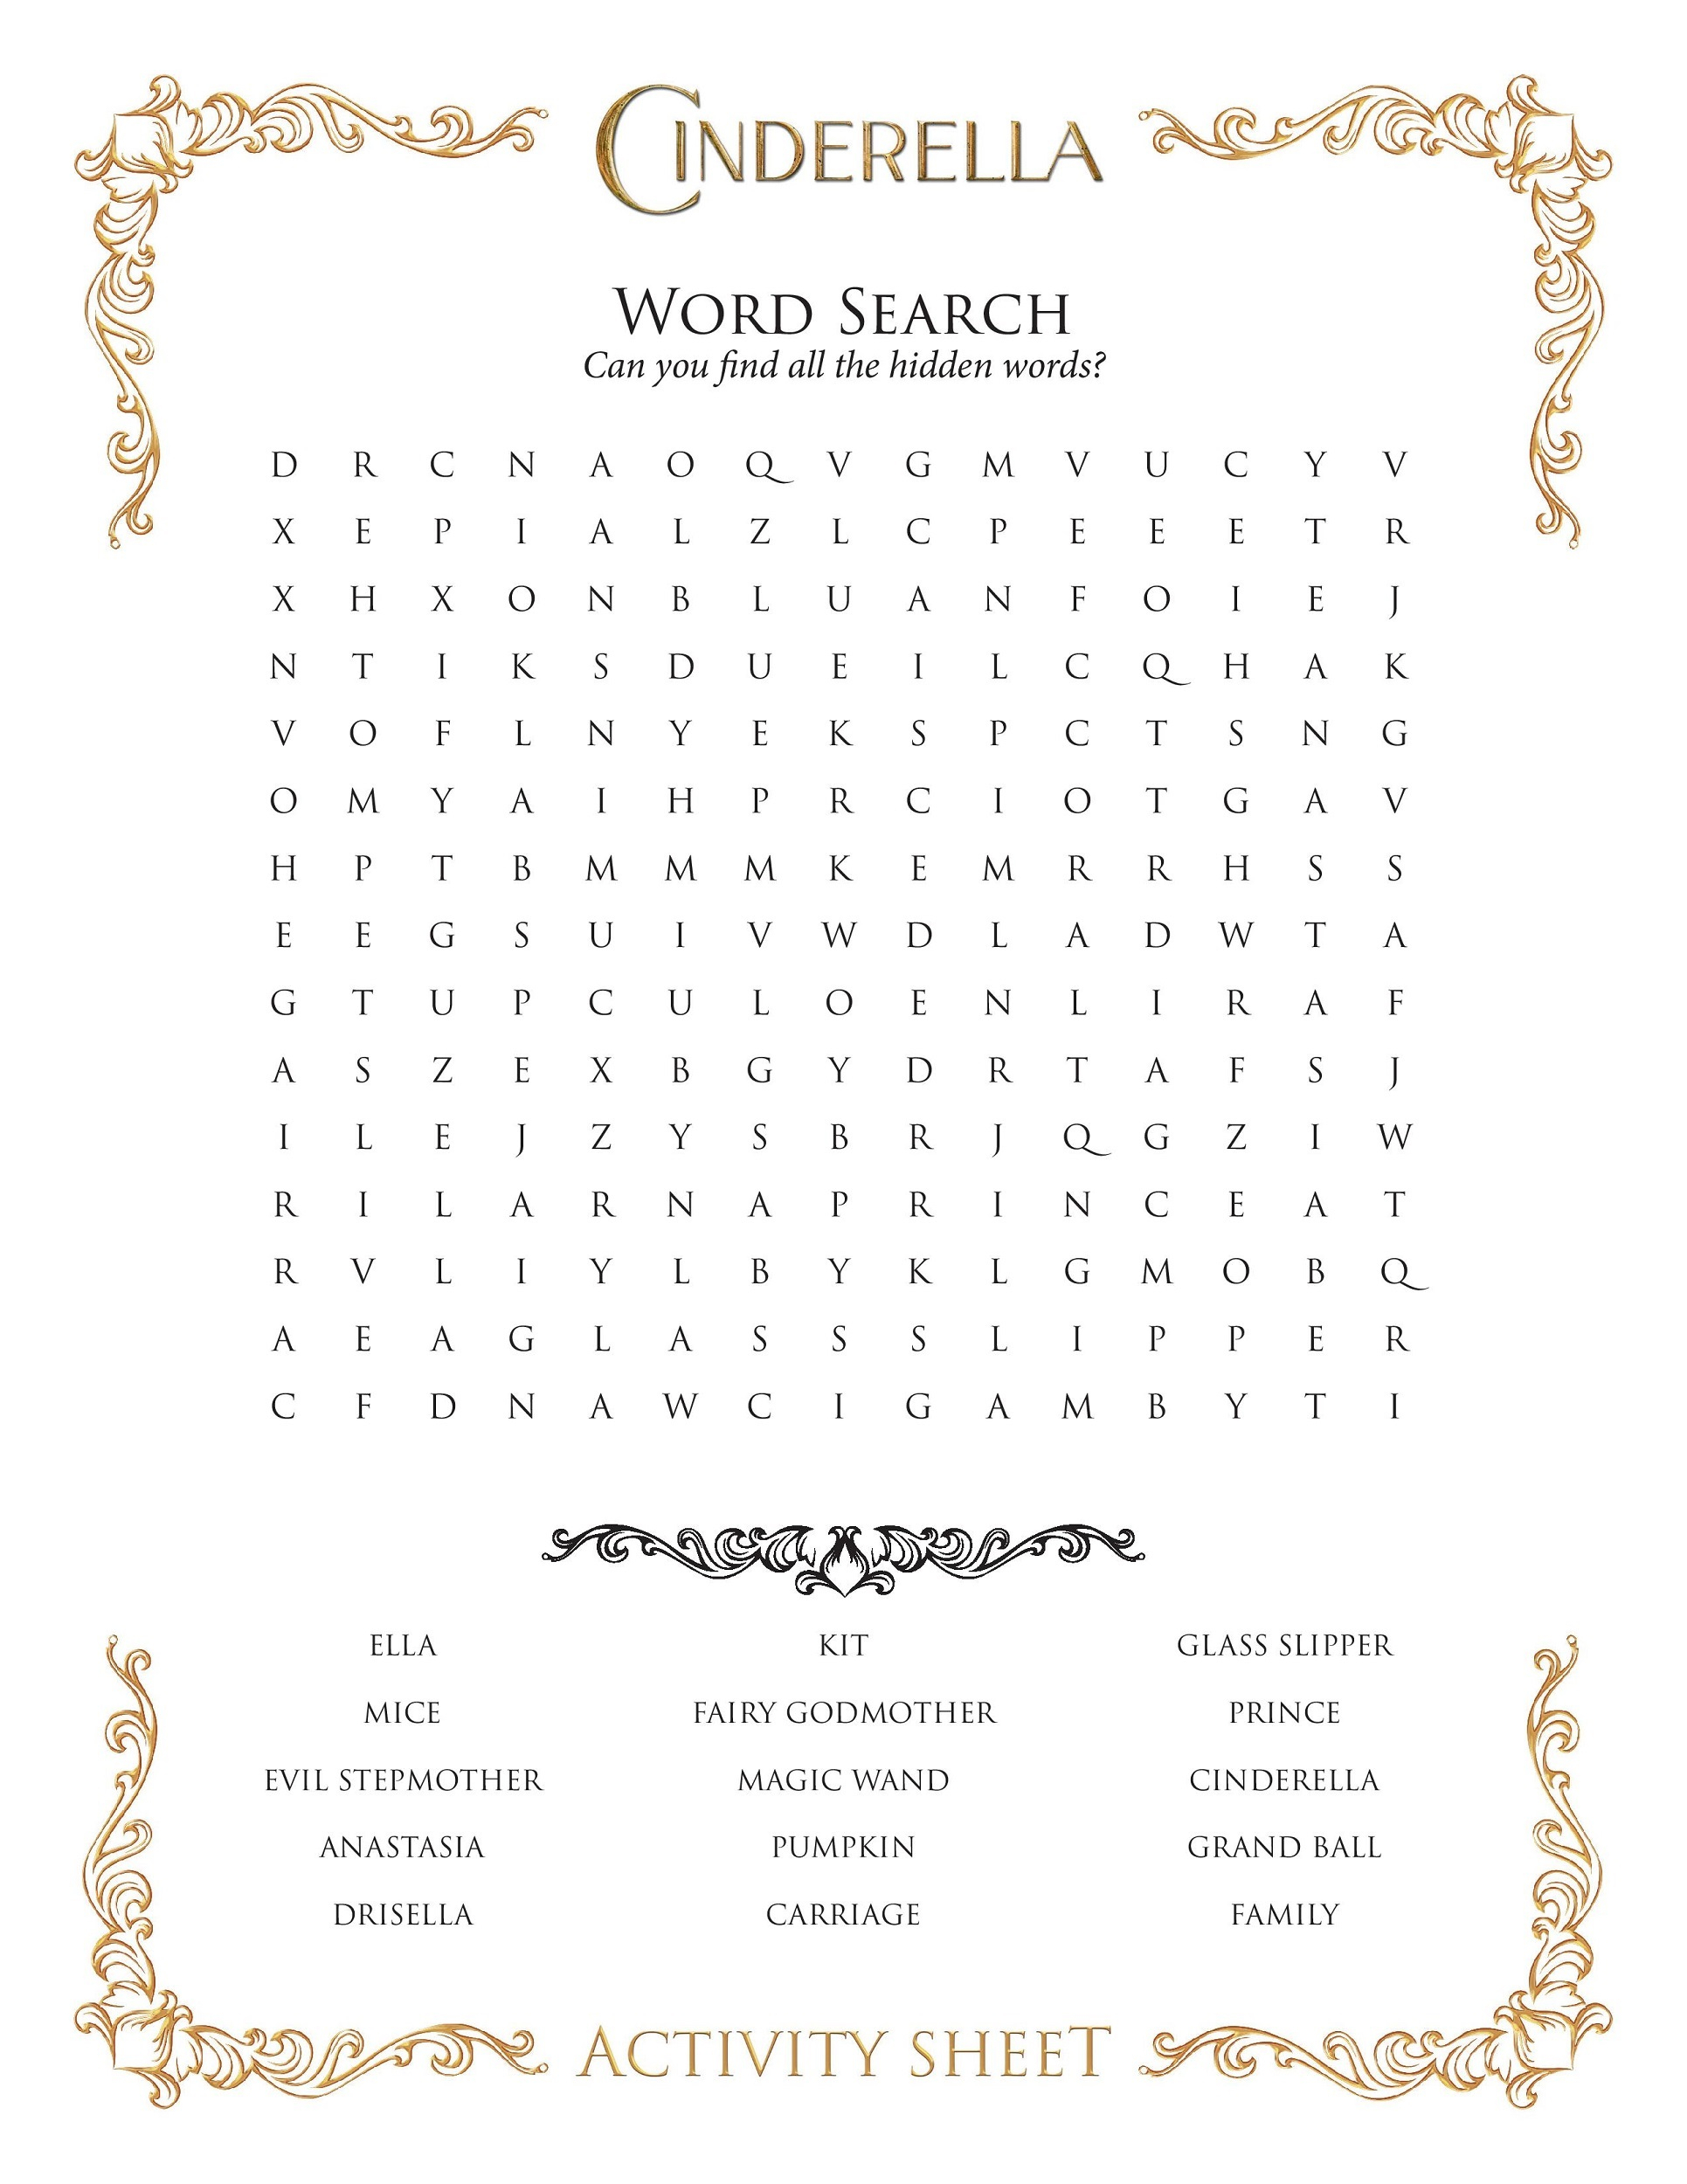 15 Free Disney Word Searches | Kittybabylove inside Disney Princesses Word Search